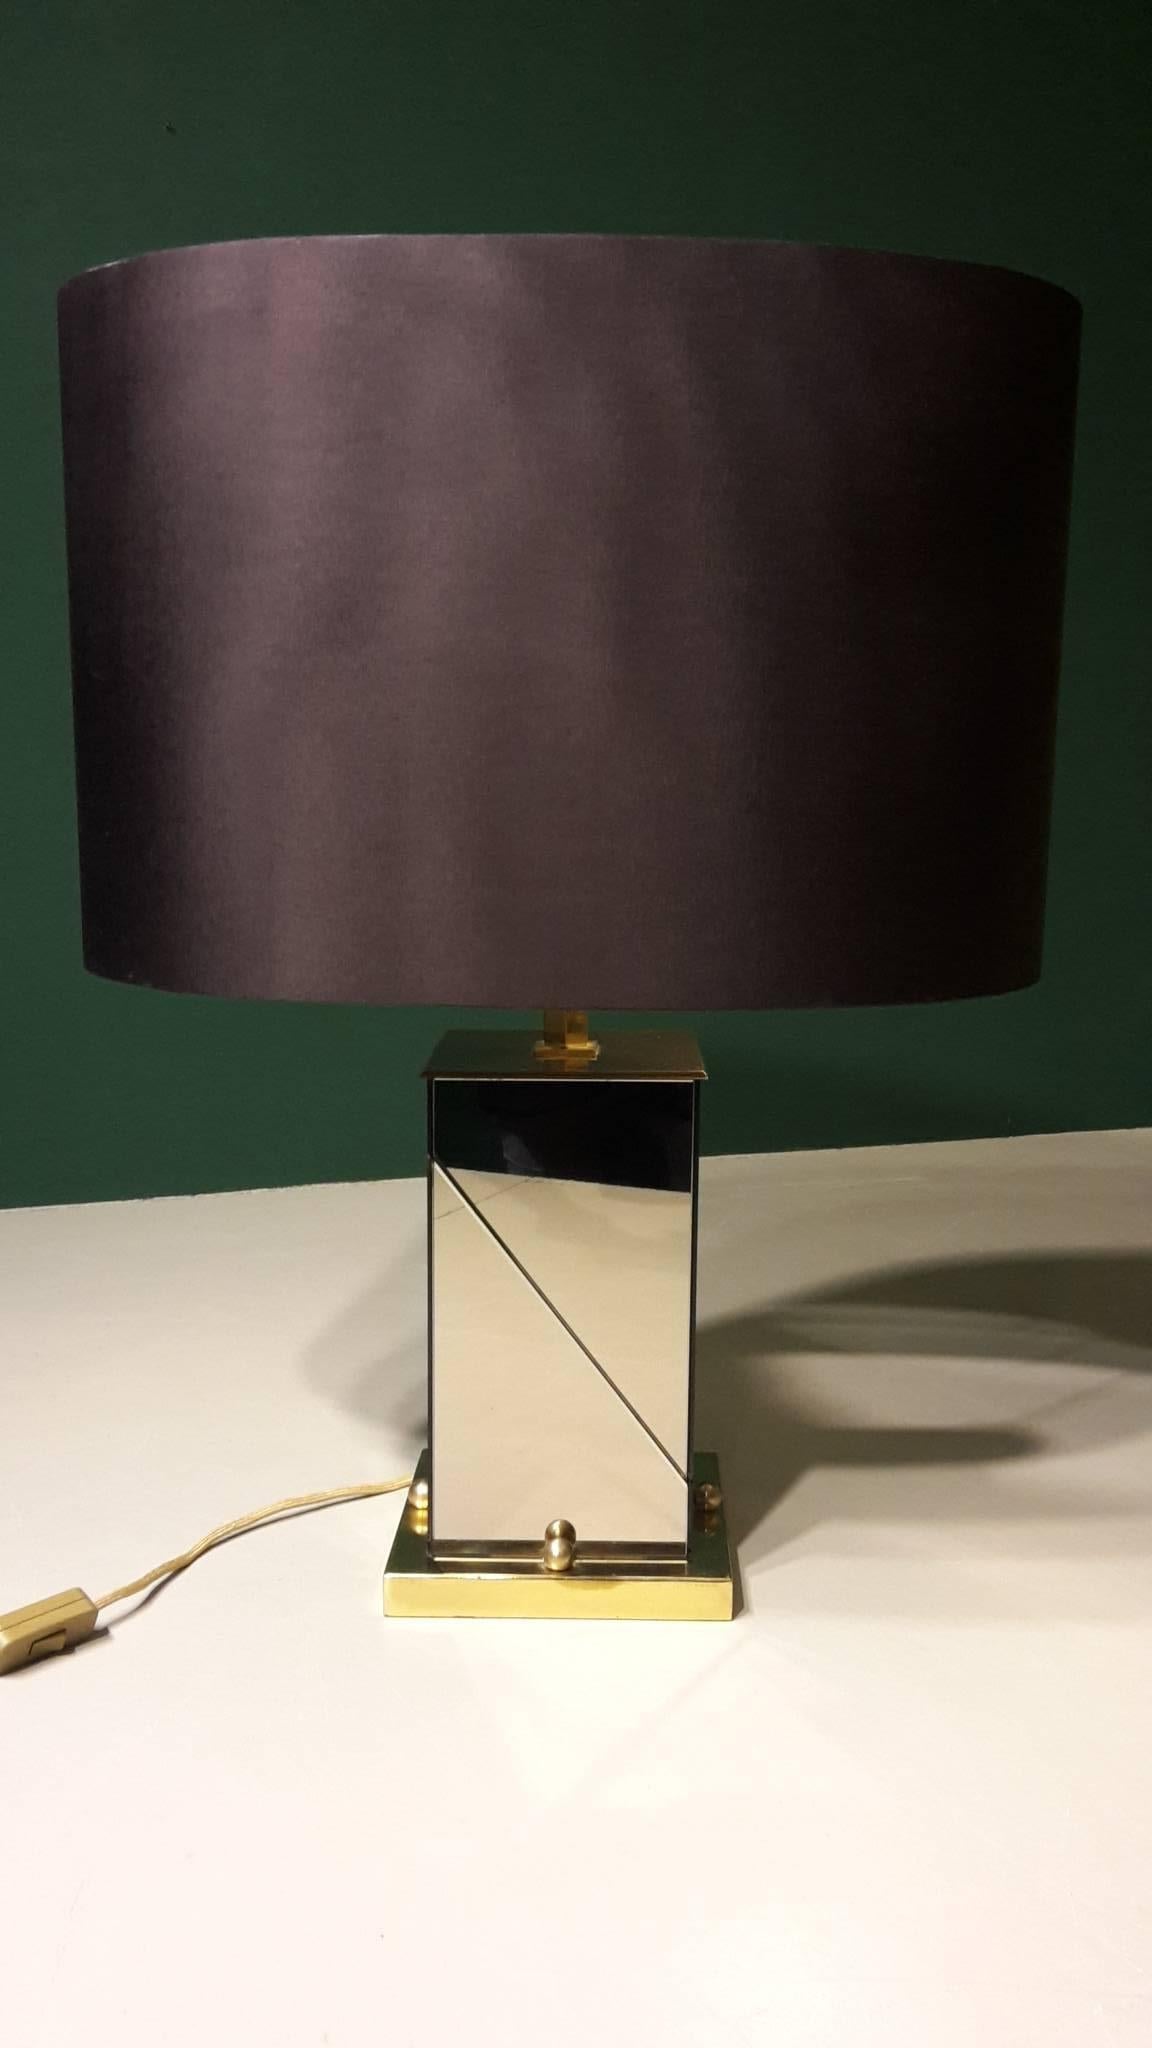 20th century Italian table lamp by Romeo Rega made of mirror and brass from the 1970s.